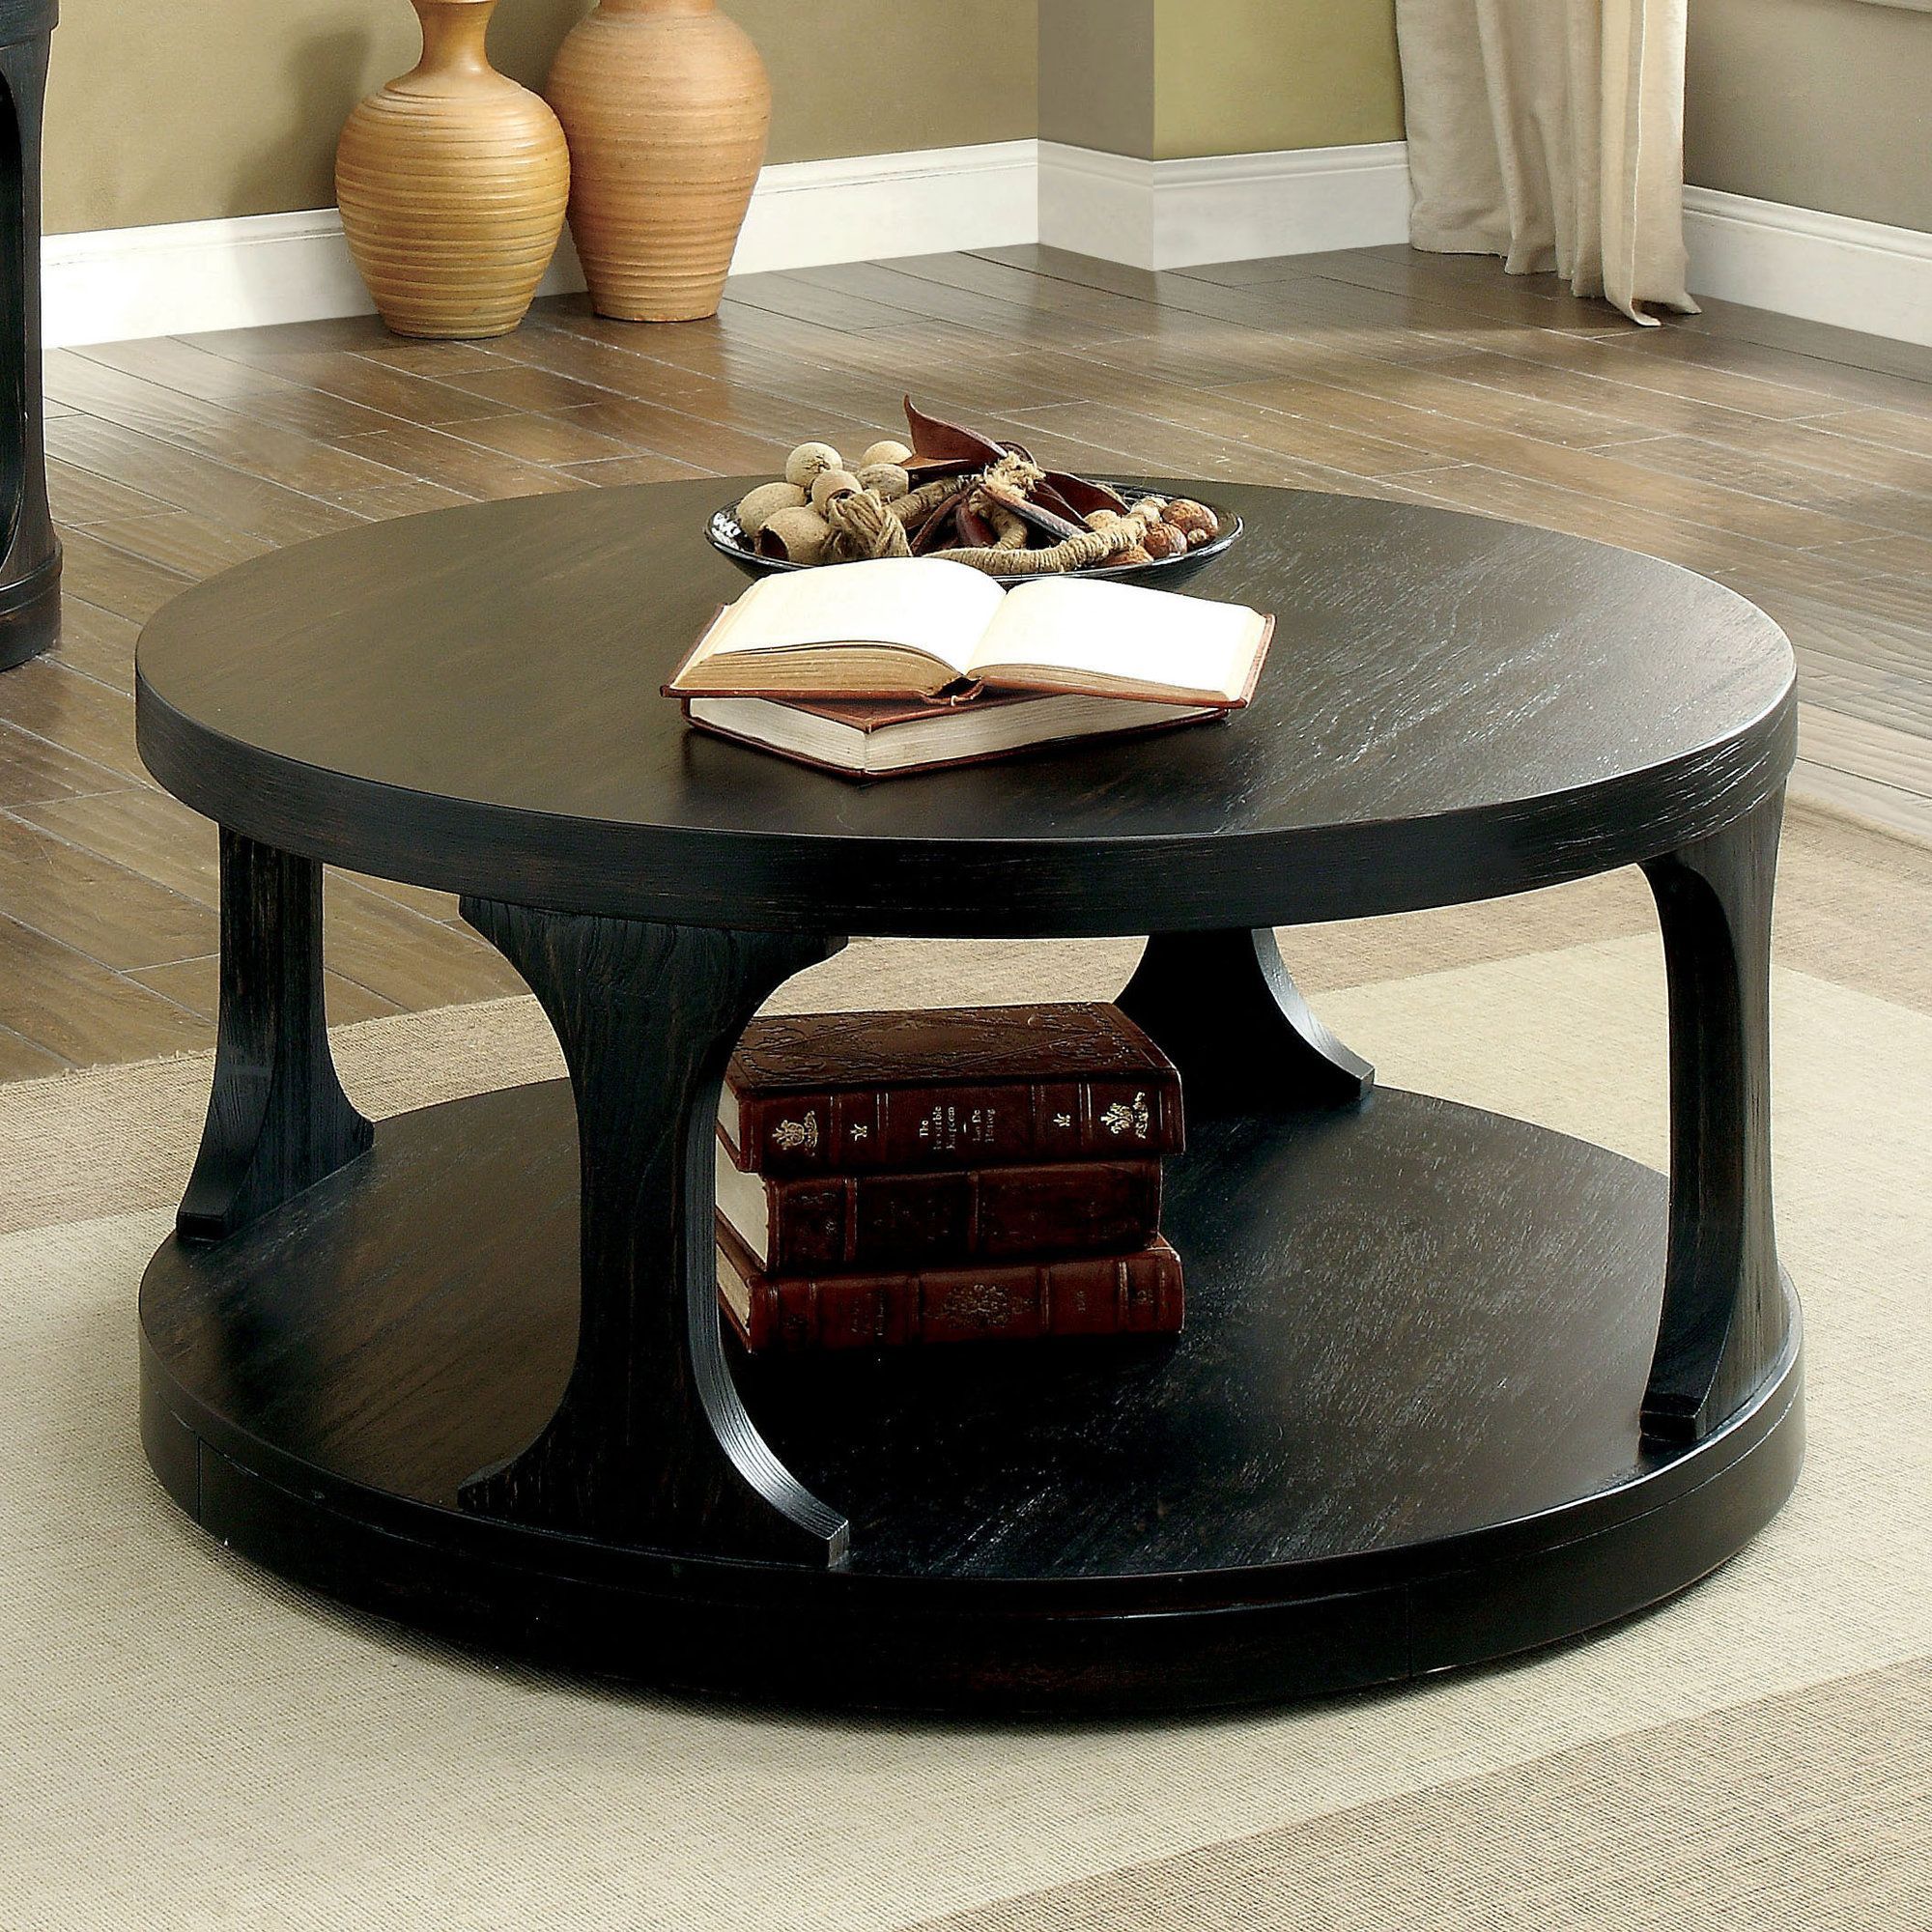 Bring A Touch Of Elegance To Your Home With A Black Circle Coffee Table Regarding Full Black Round Coffee Tables (View 10 of 20)